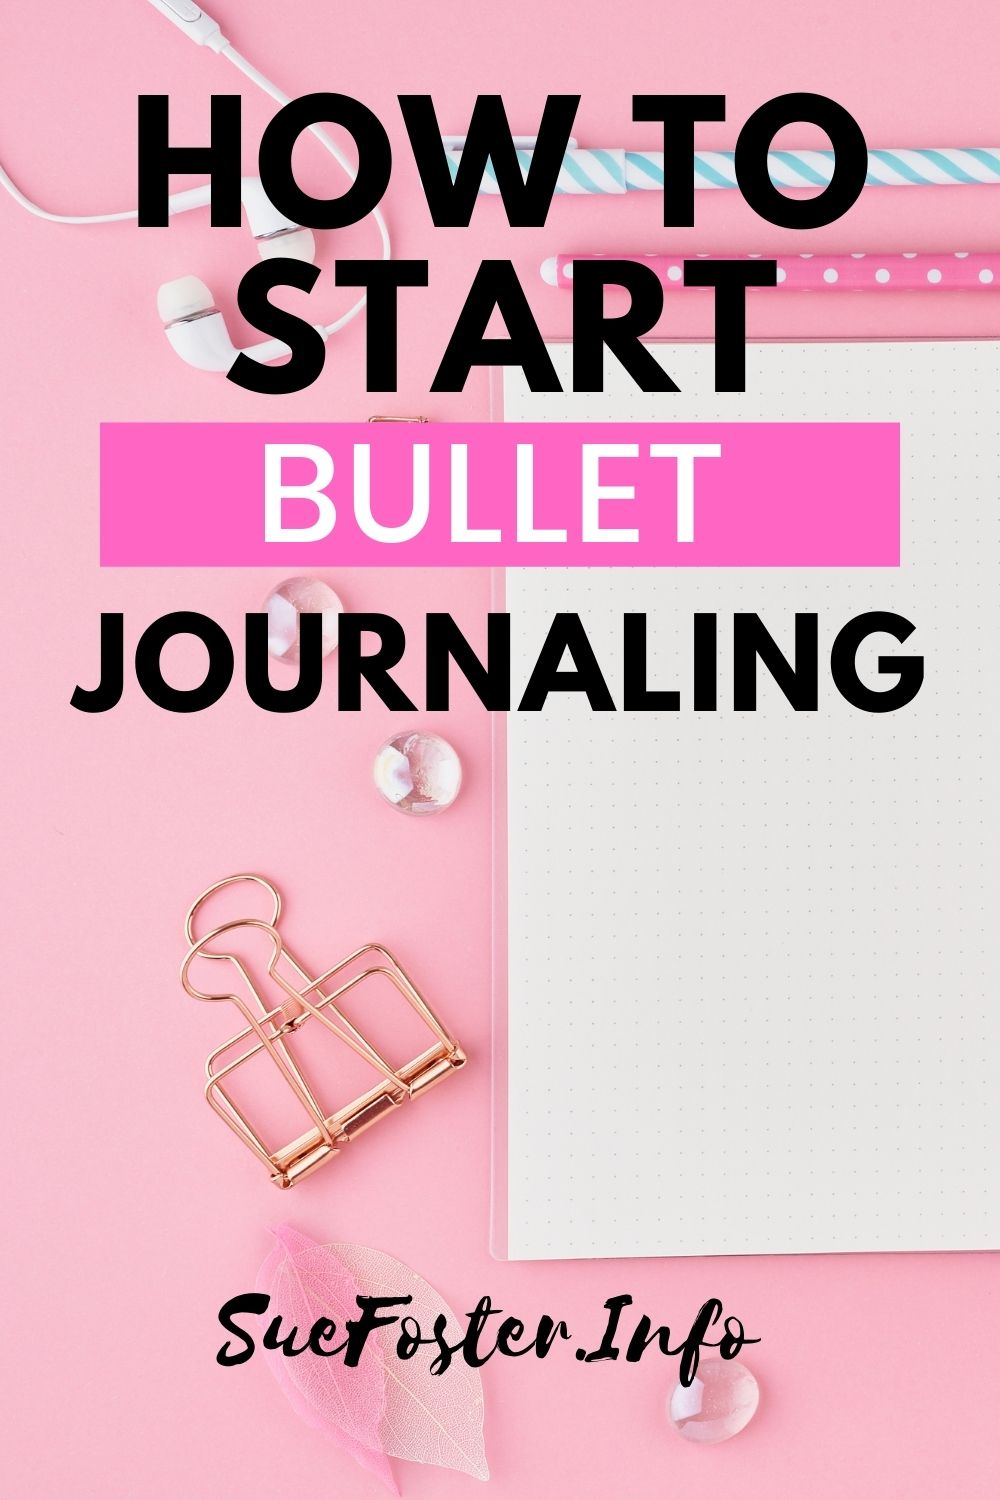 Start bullet journaling without feeling overwhelmed. My tips include picking areas to focus on, setting simple goals, and staying positive.